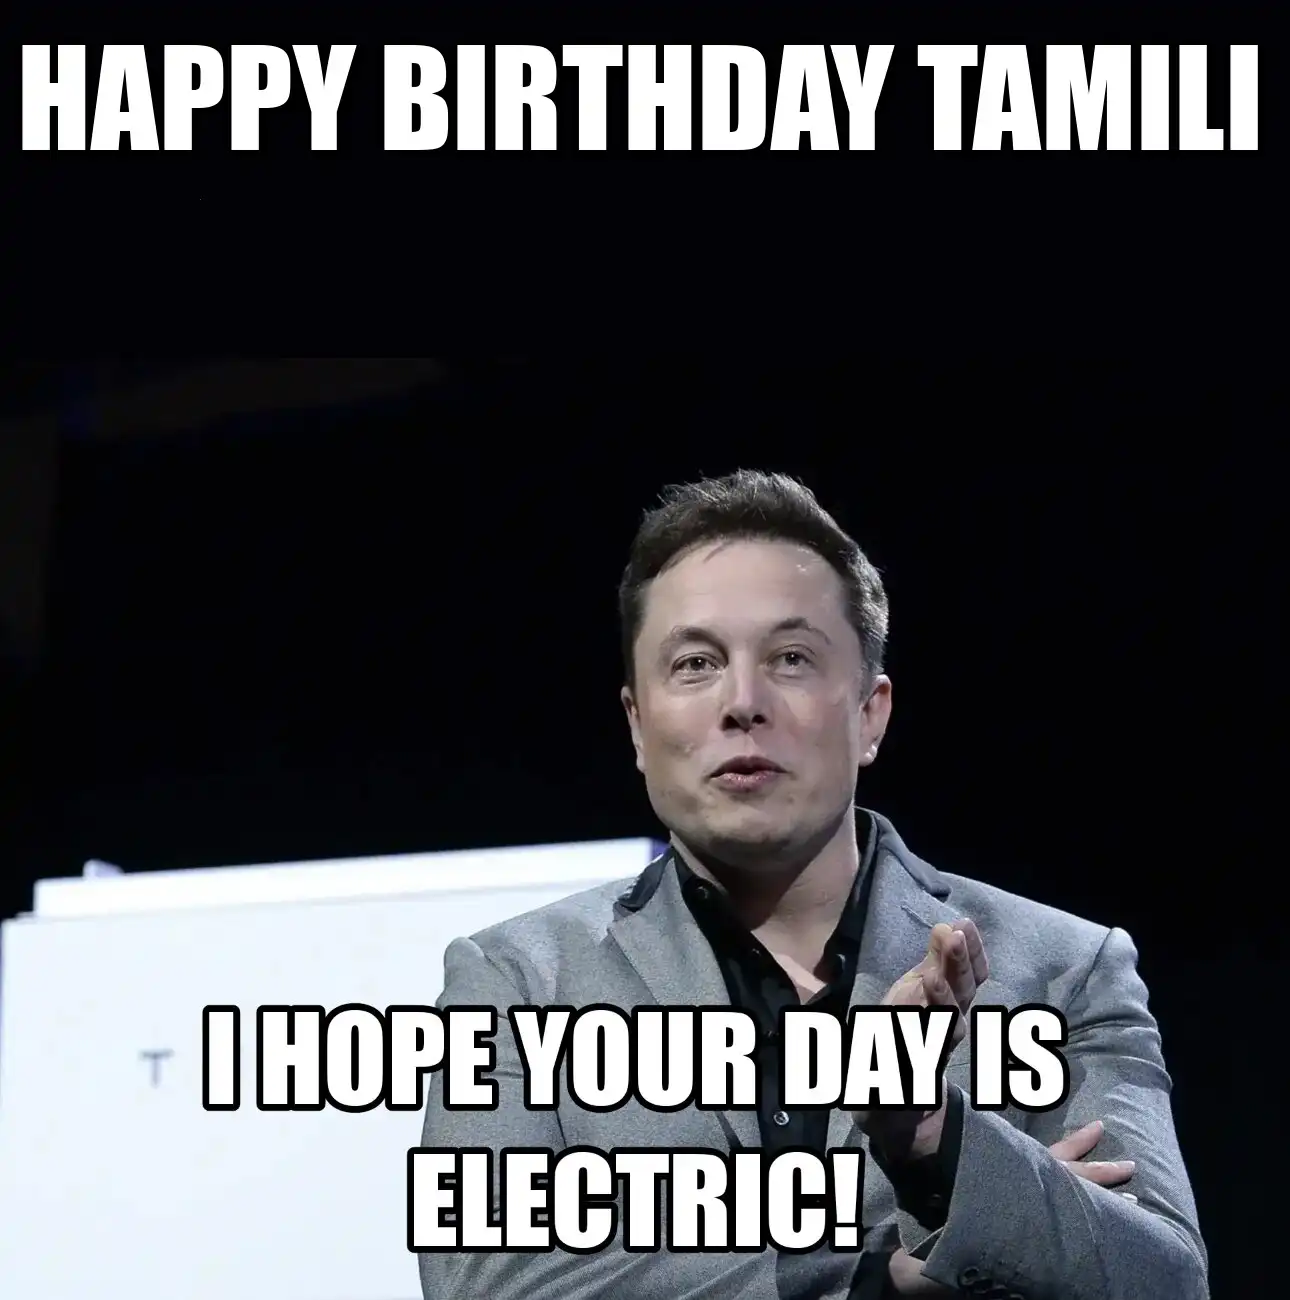 Happy Birthday Tamili I Hope Your Day Is Electric Meme